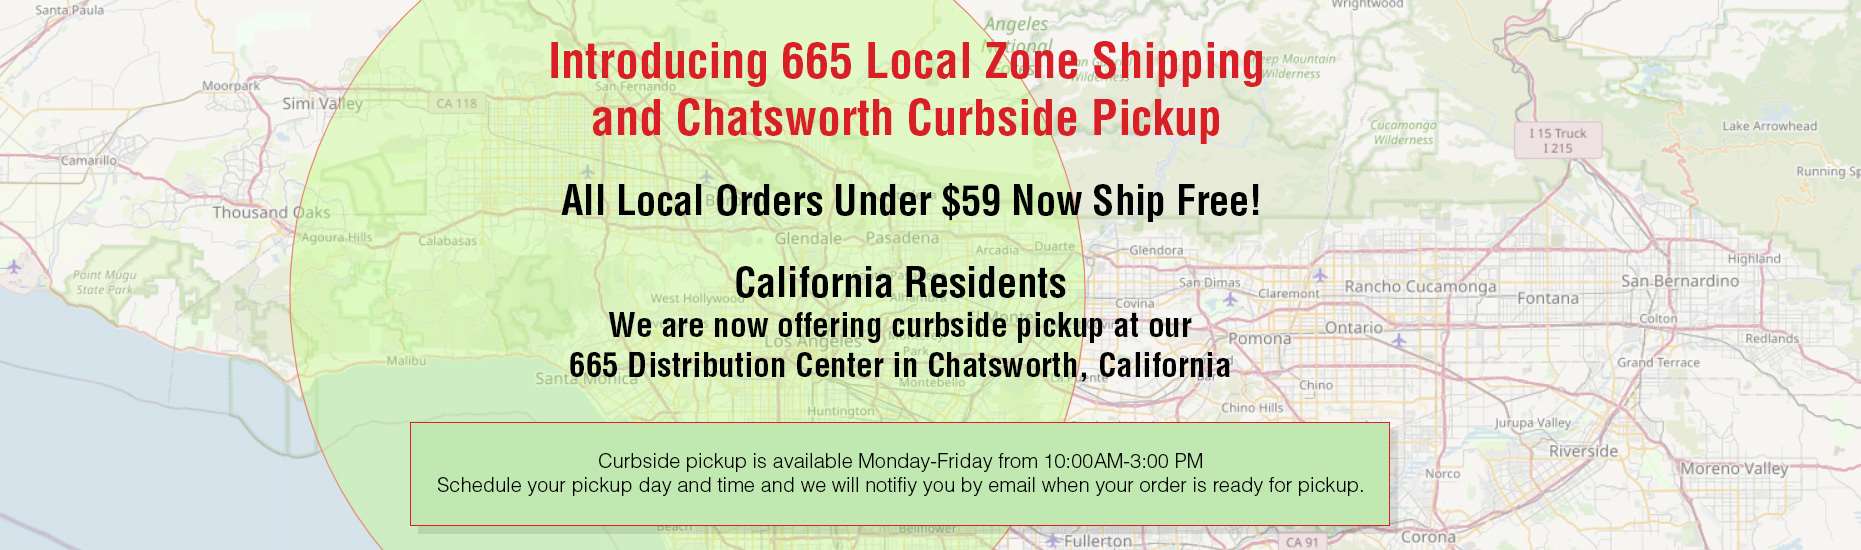 Introducing 665 Local Zone Shipping and Chatsworth Curbside Pickup